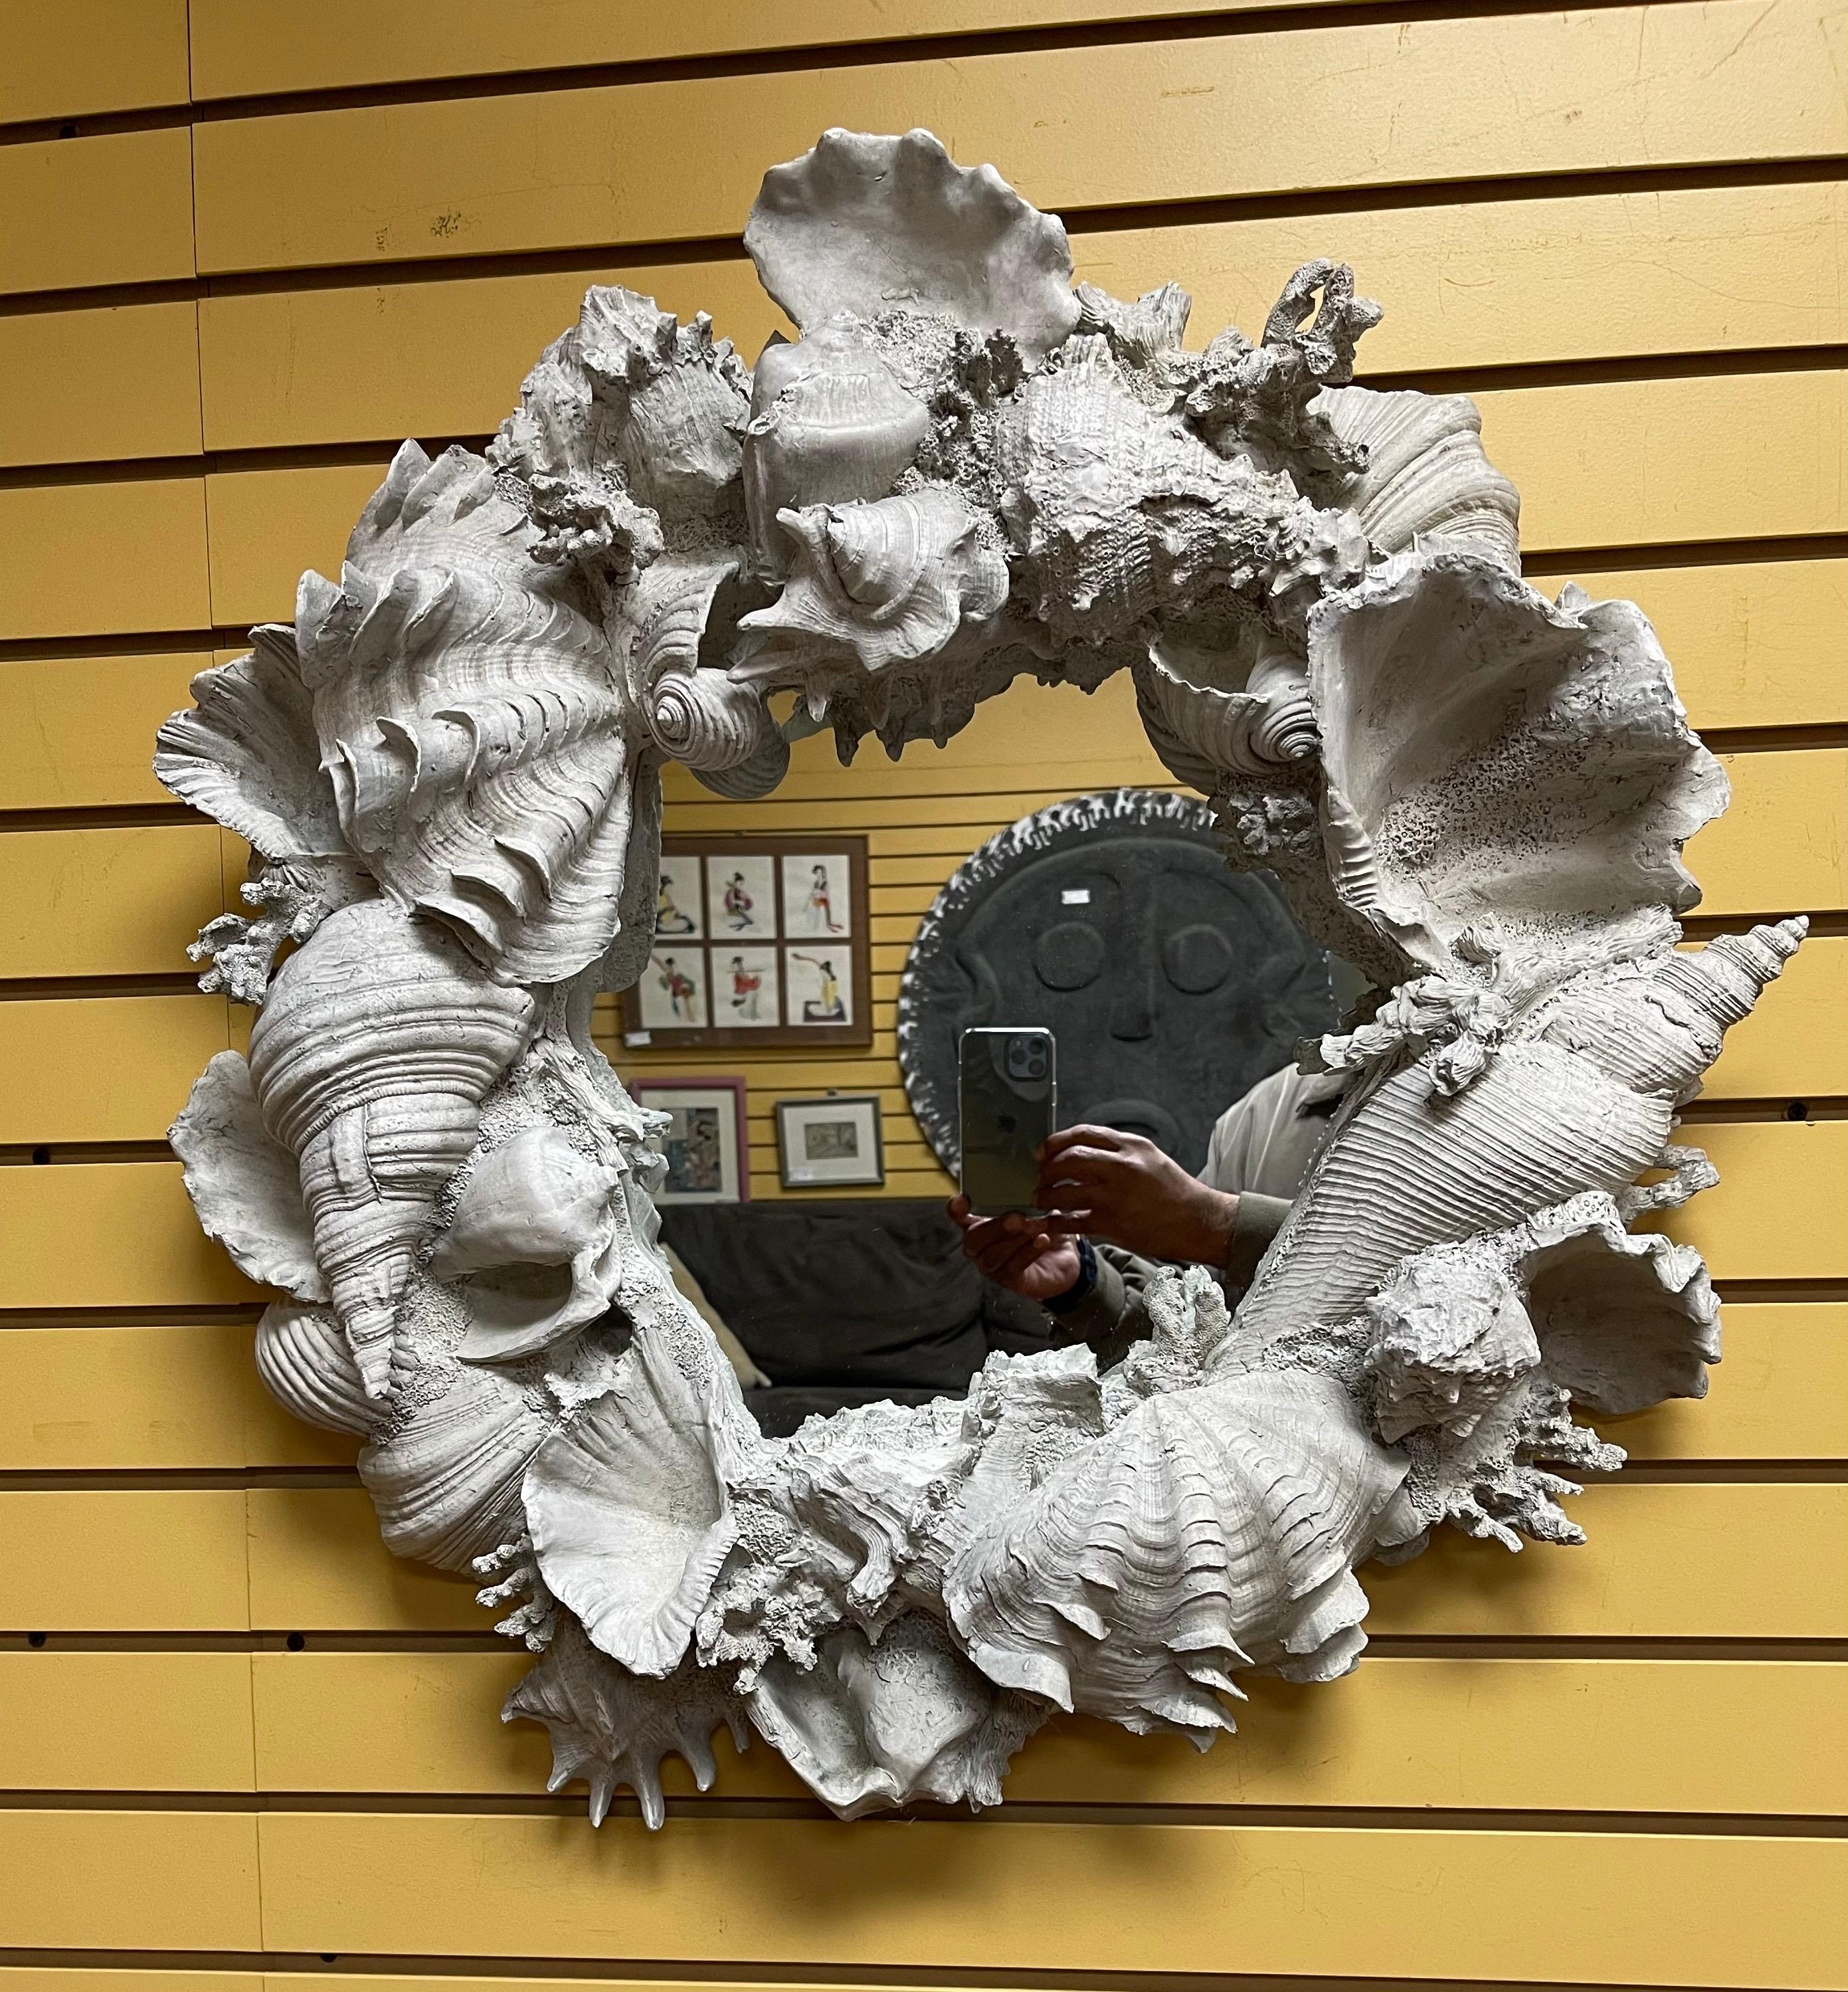 A very cool faux seashell encrusted mirror in molded fiberglass, circa 2000s. The mirror is decorated throughout with shells of various sizes and designs; it has a concrete look and color to it. The piece measures: 28